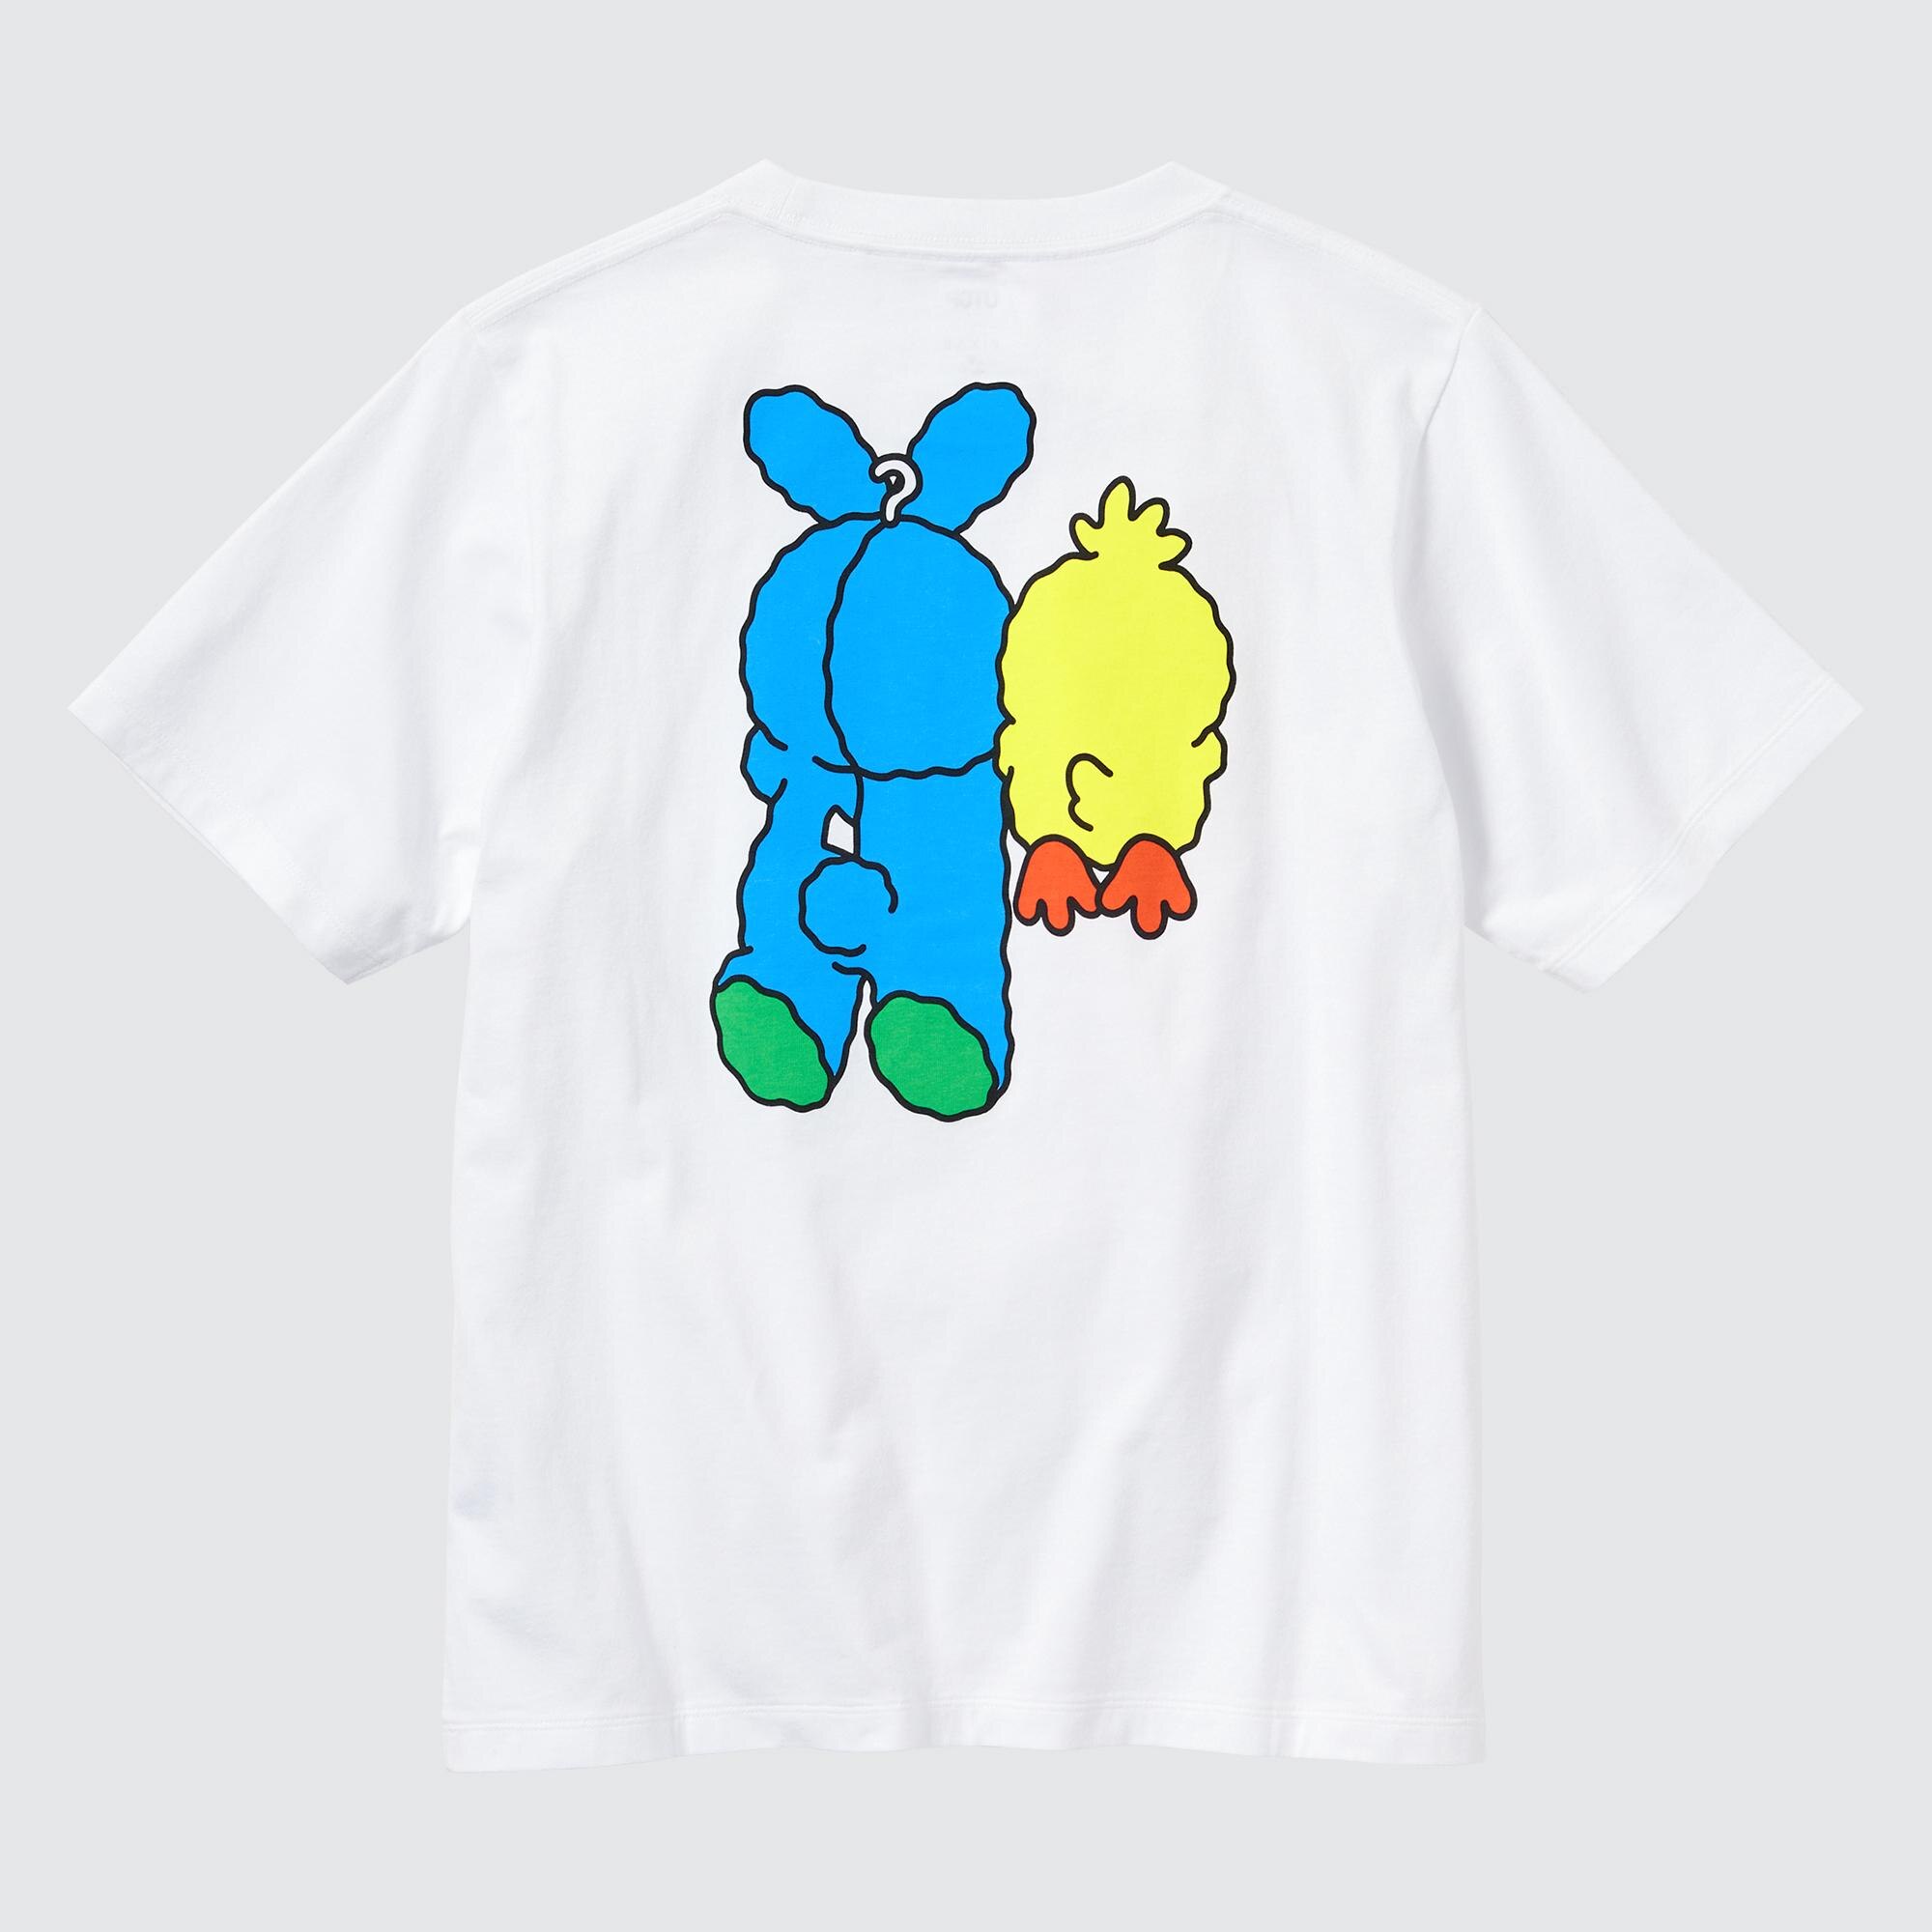 Uniqlo rolls out Kaws summer collection